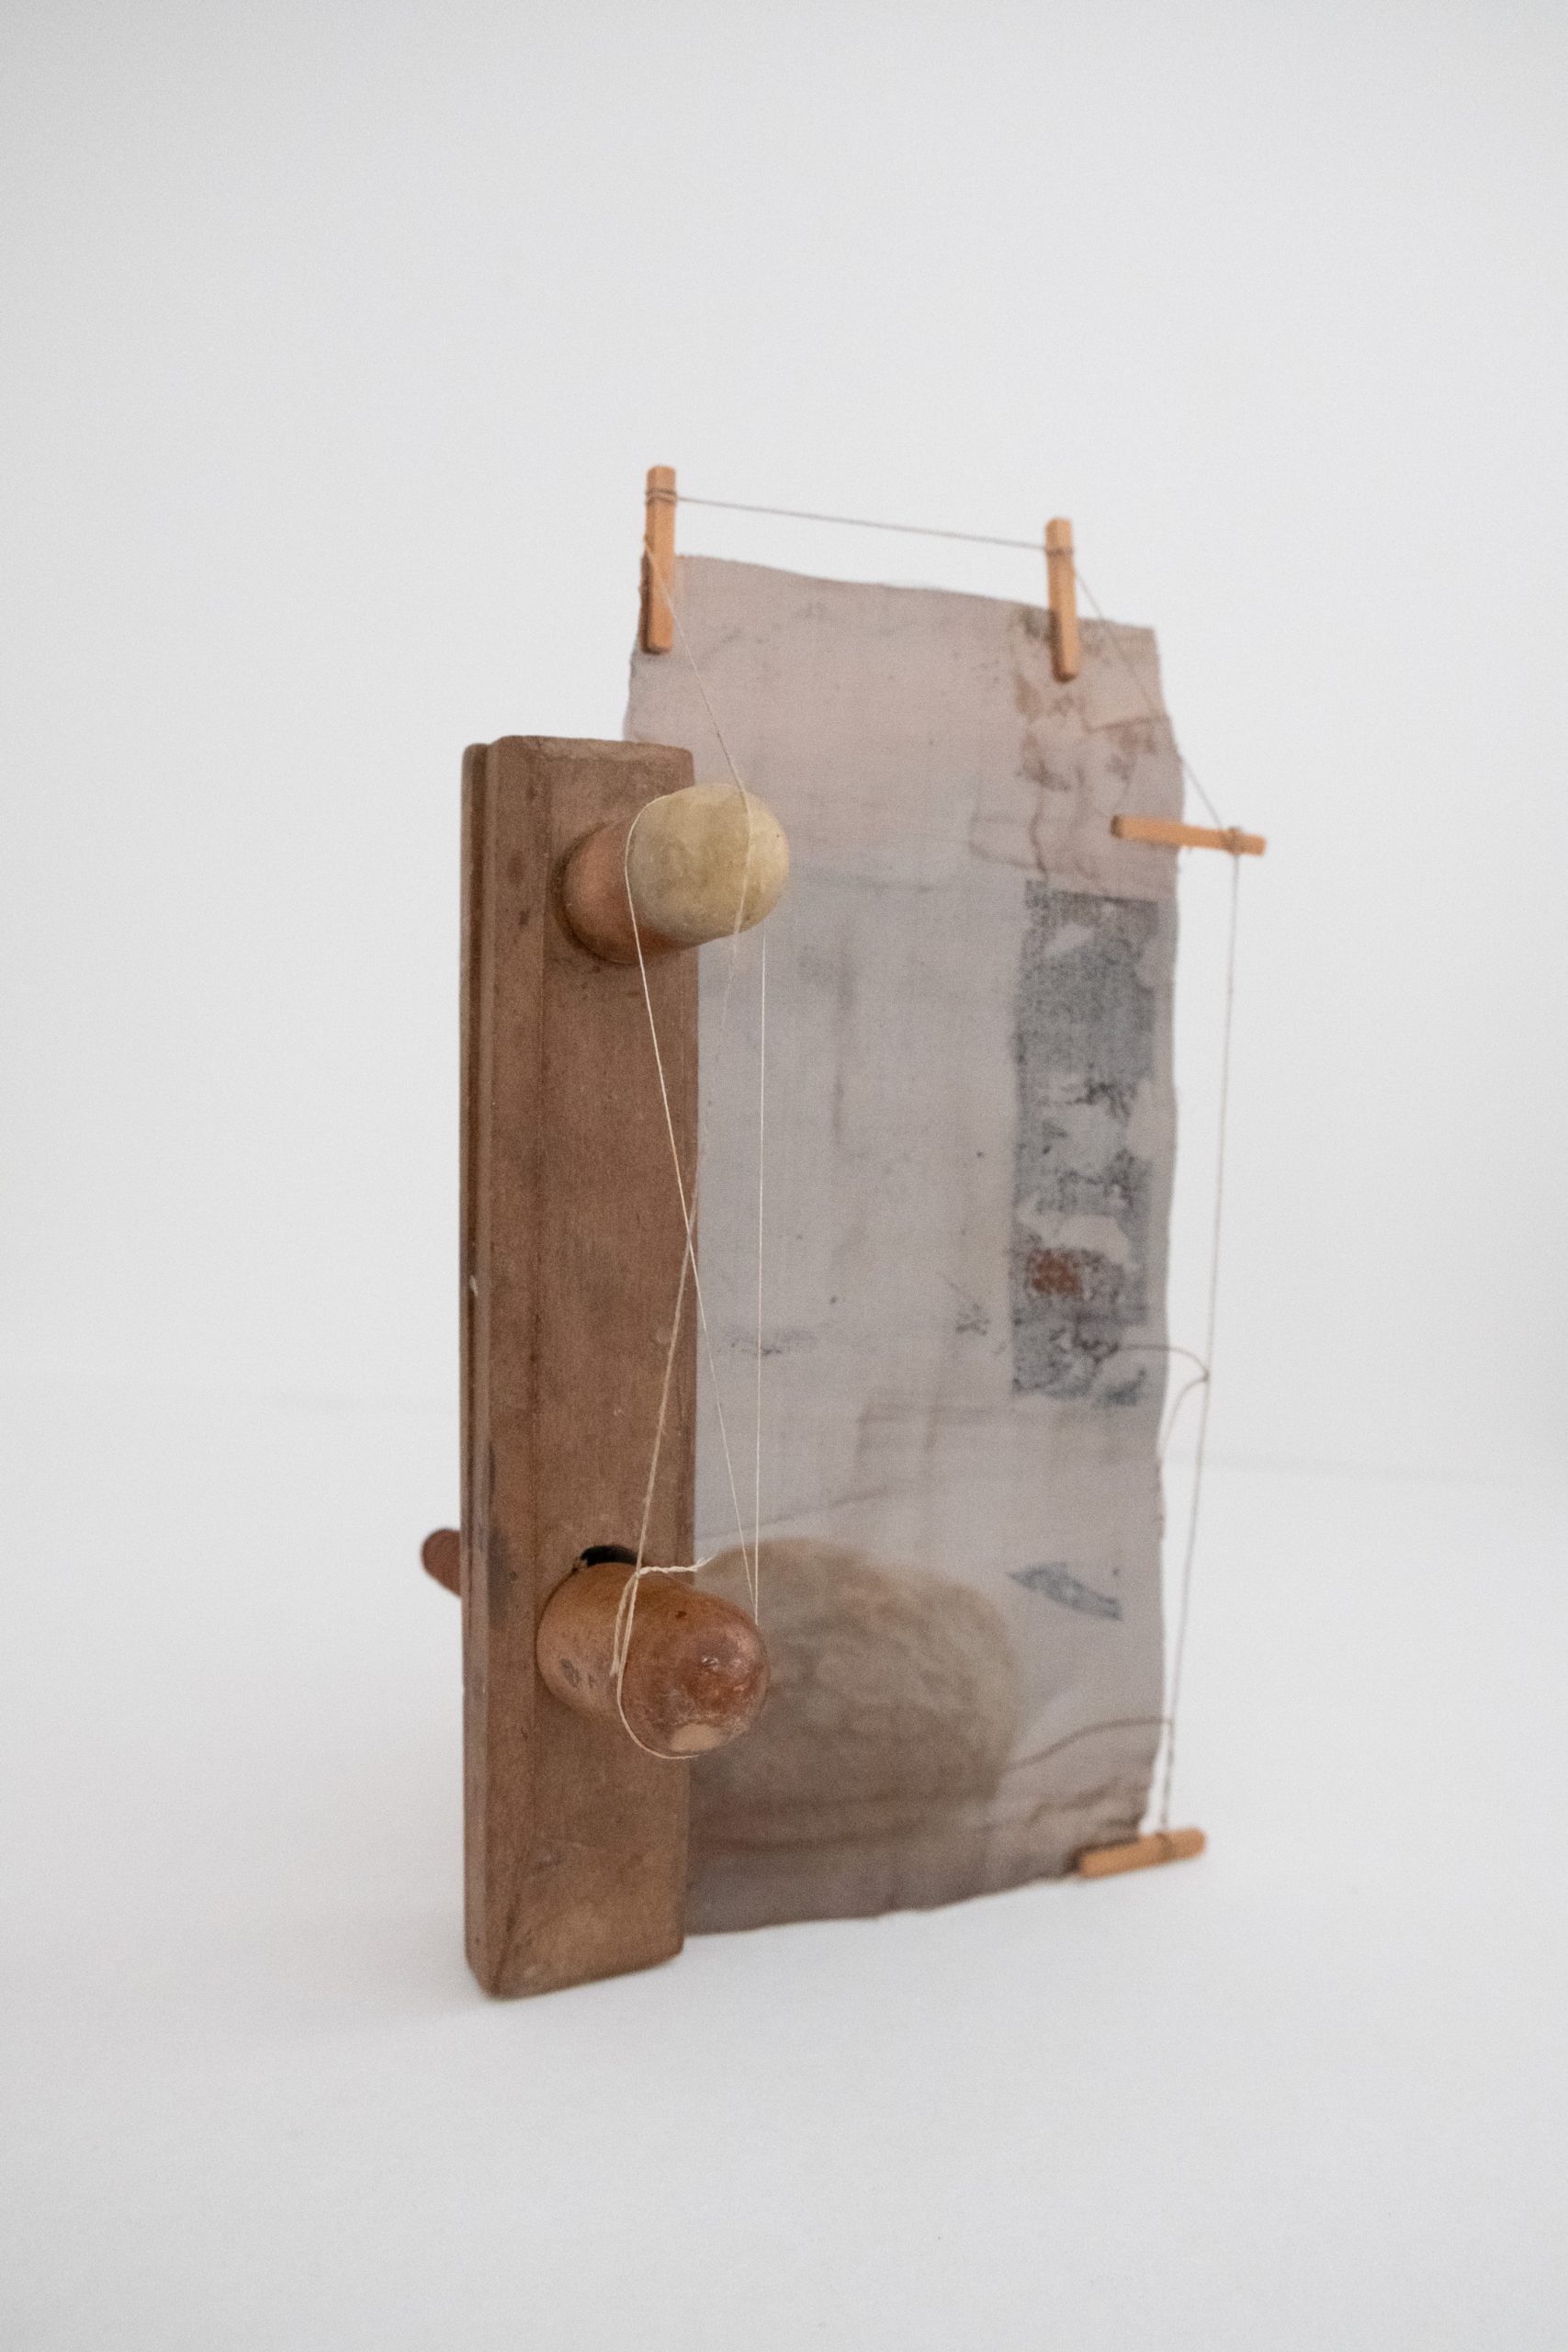 'Receiver' . edited wooden clamp, beeswax, copper gauze, dowel, thread, limestone . 22cm (h)